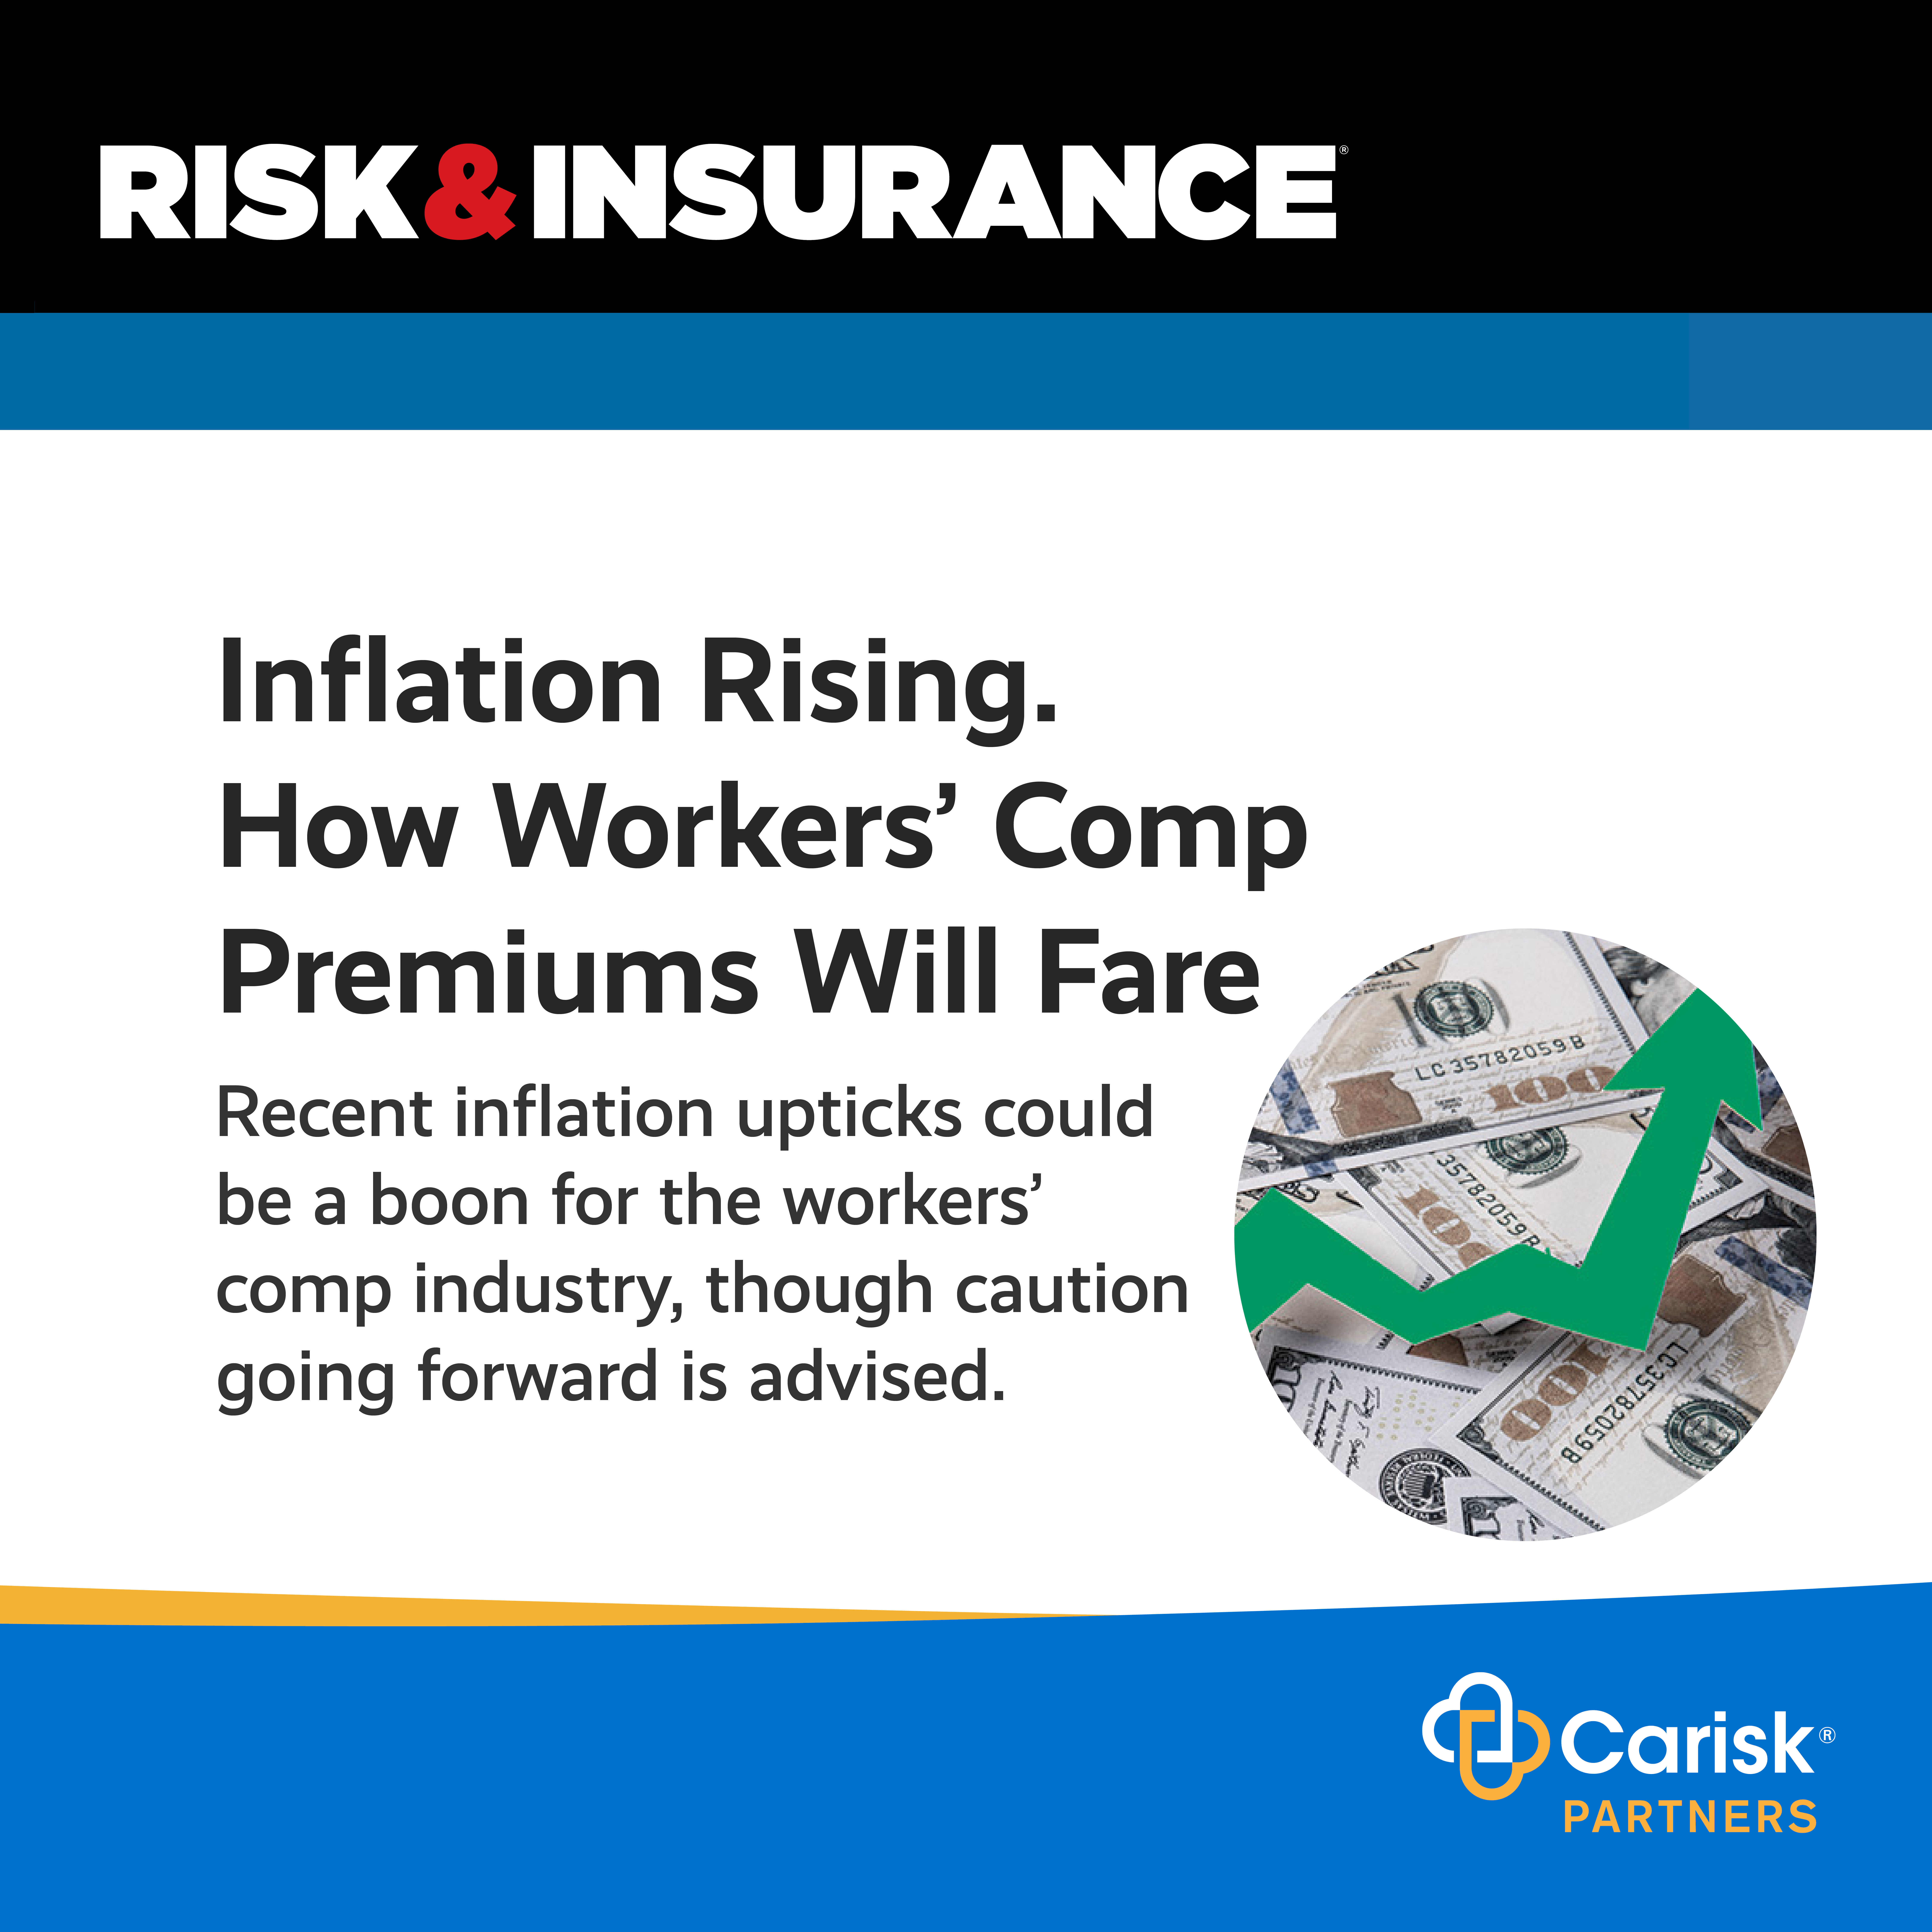 Risk & Insurance: Inflation Rising. How Workers’ Comp Premiums Will Fare